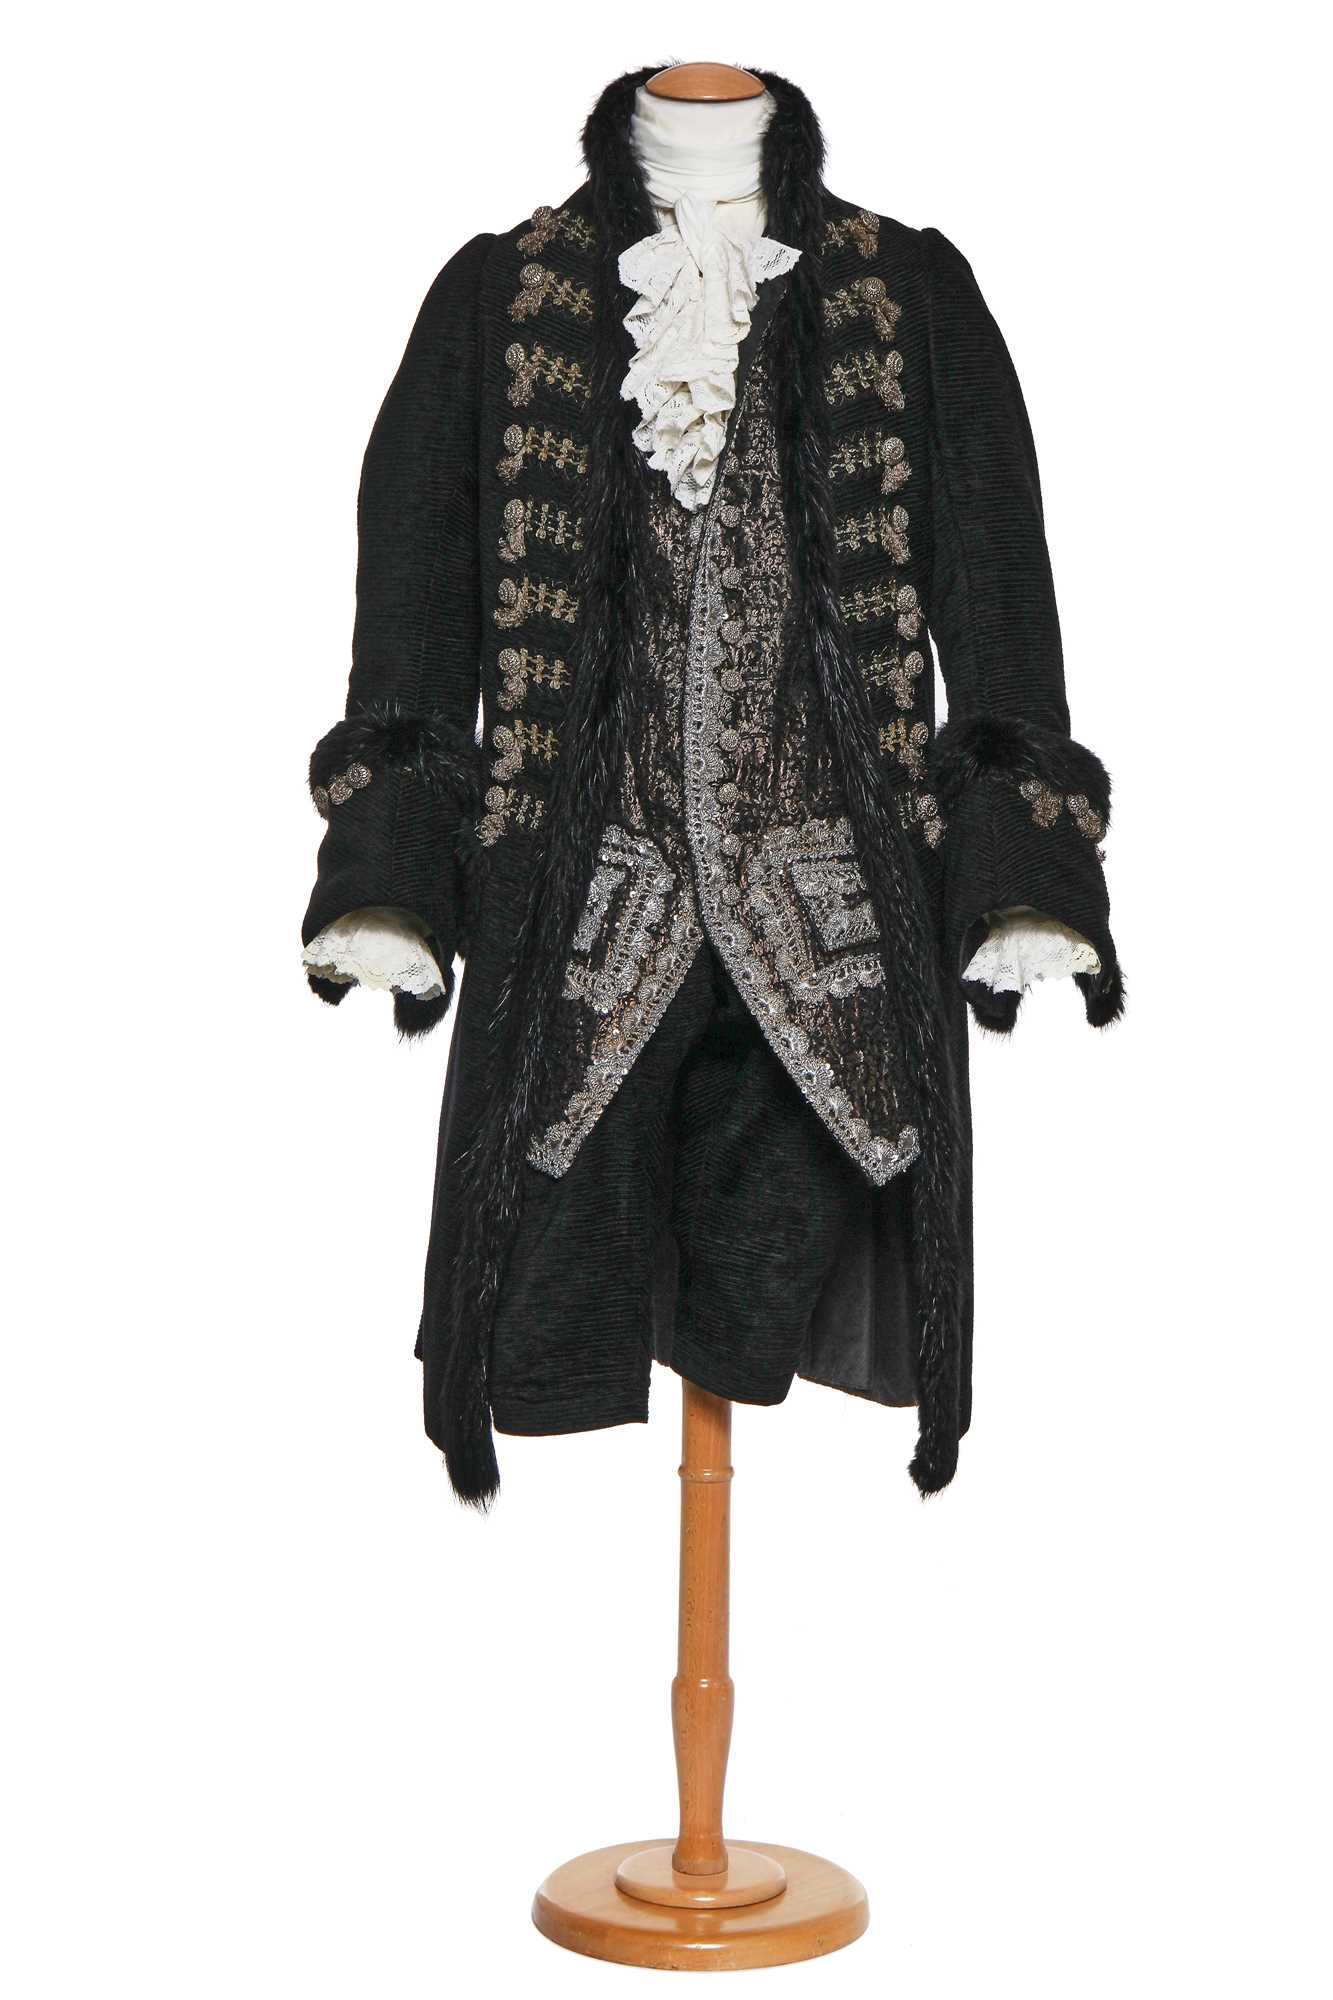 Lot 8 - Ralph Fiennes' costume for the Duke of Devonshire in the film 'The Duchess', 2008